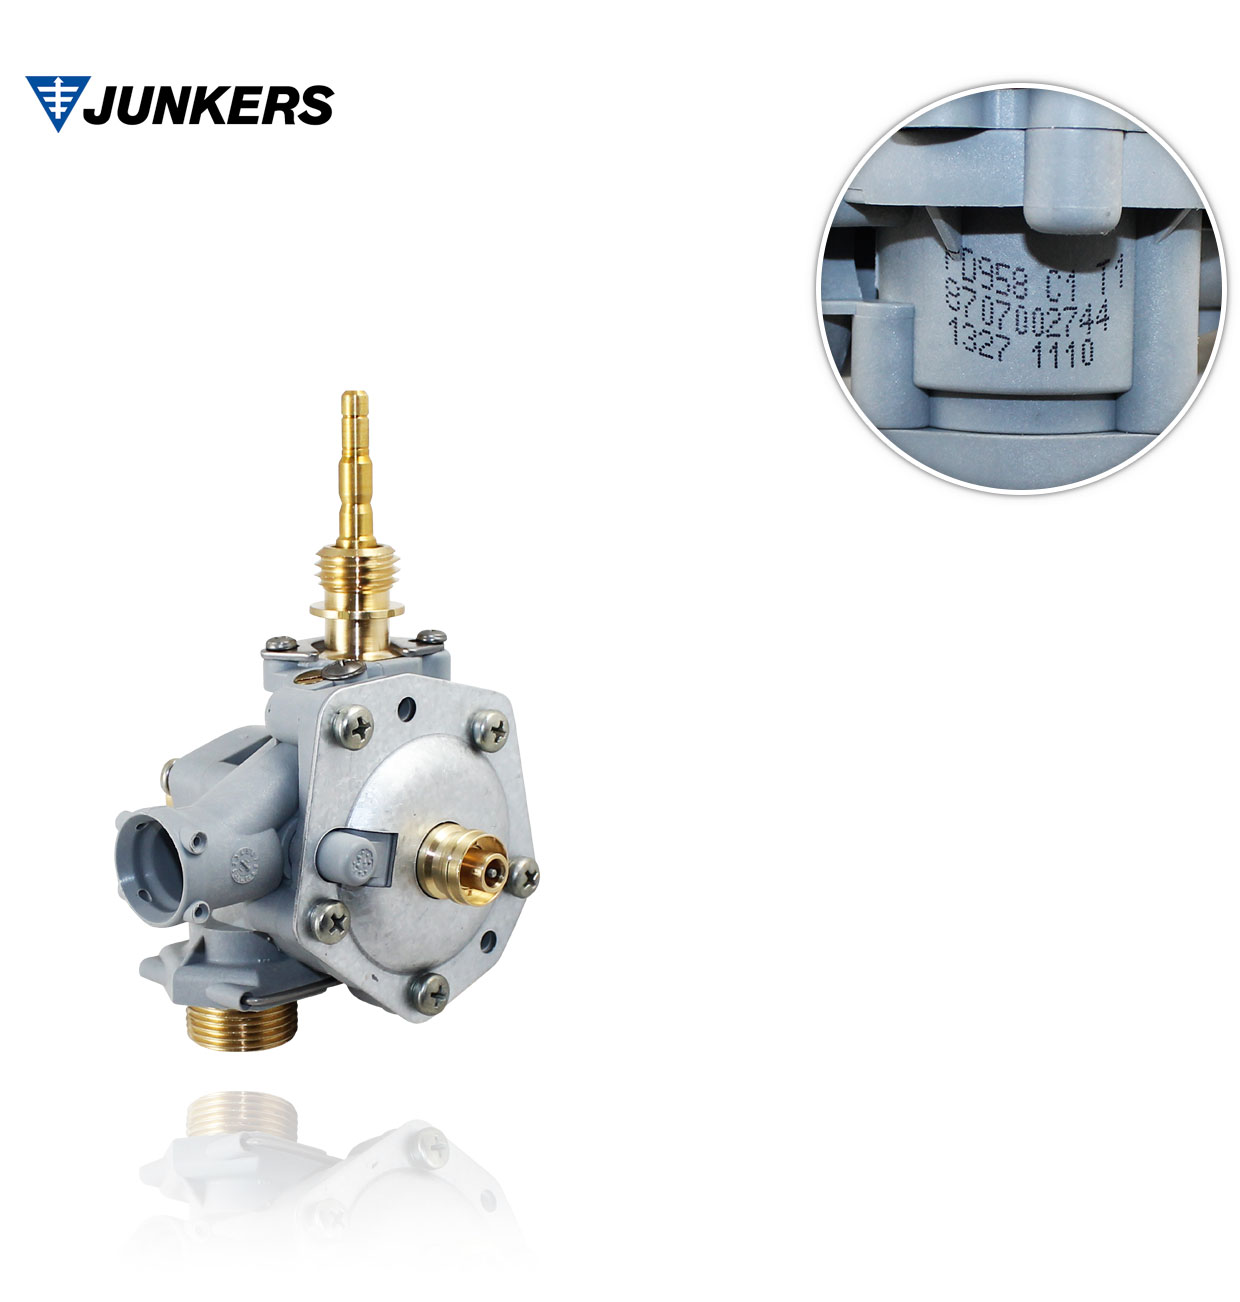 JUNKERS 8707002744 WATER UNIT